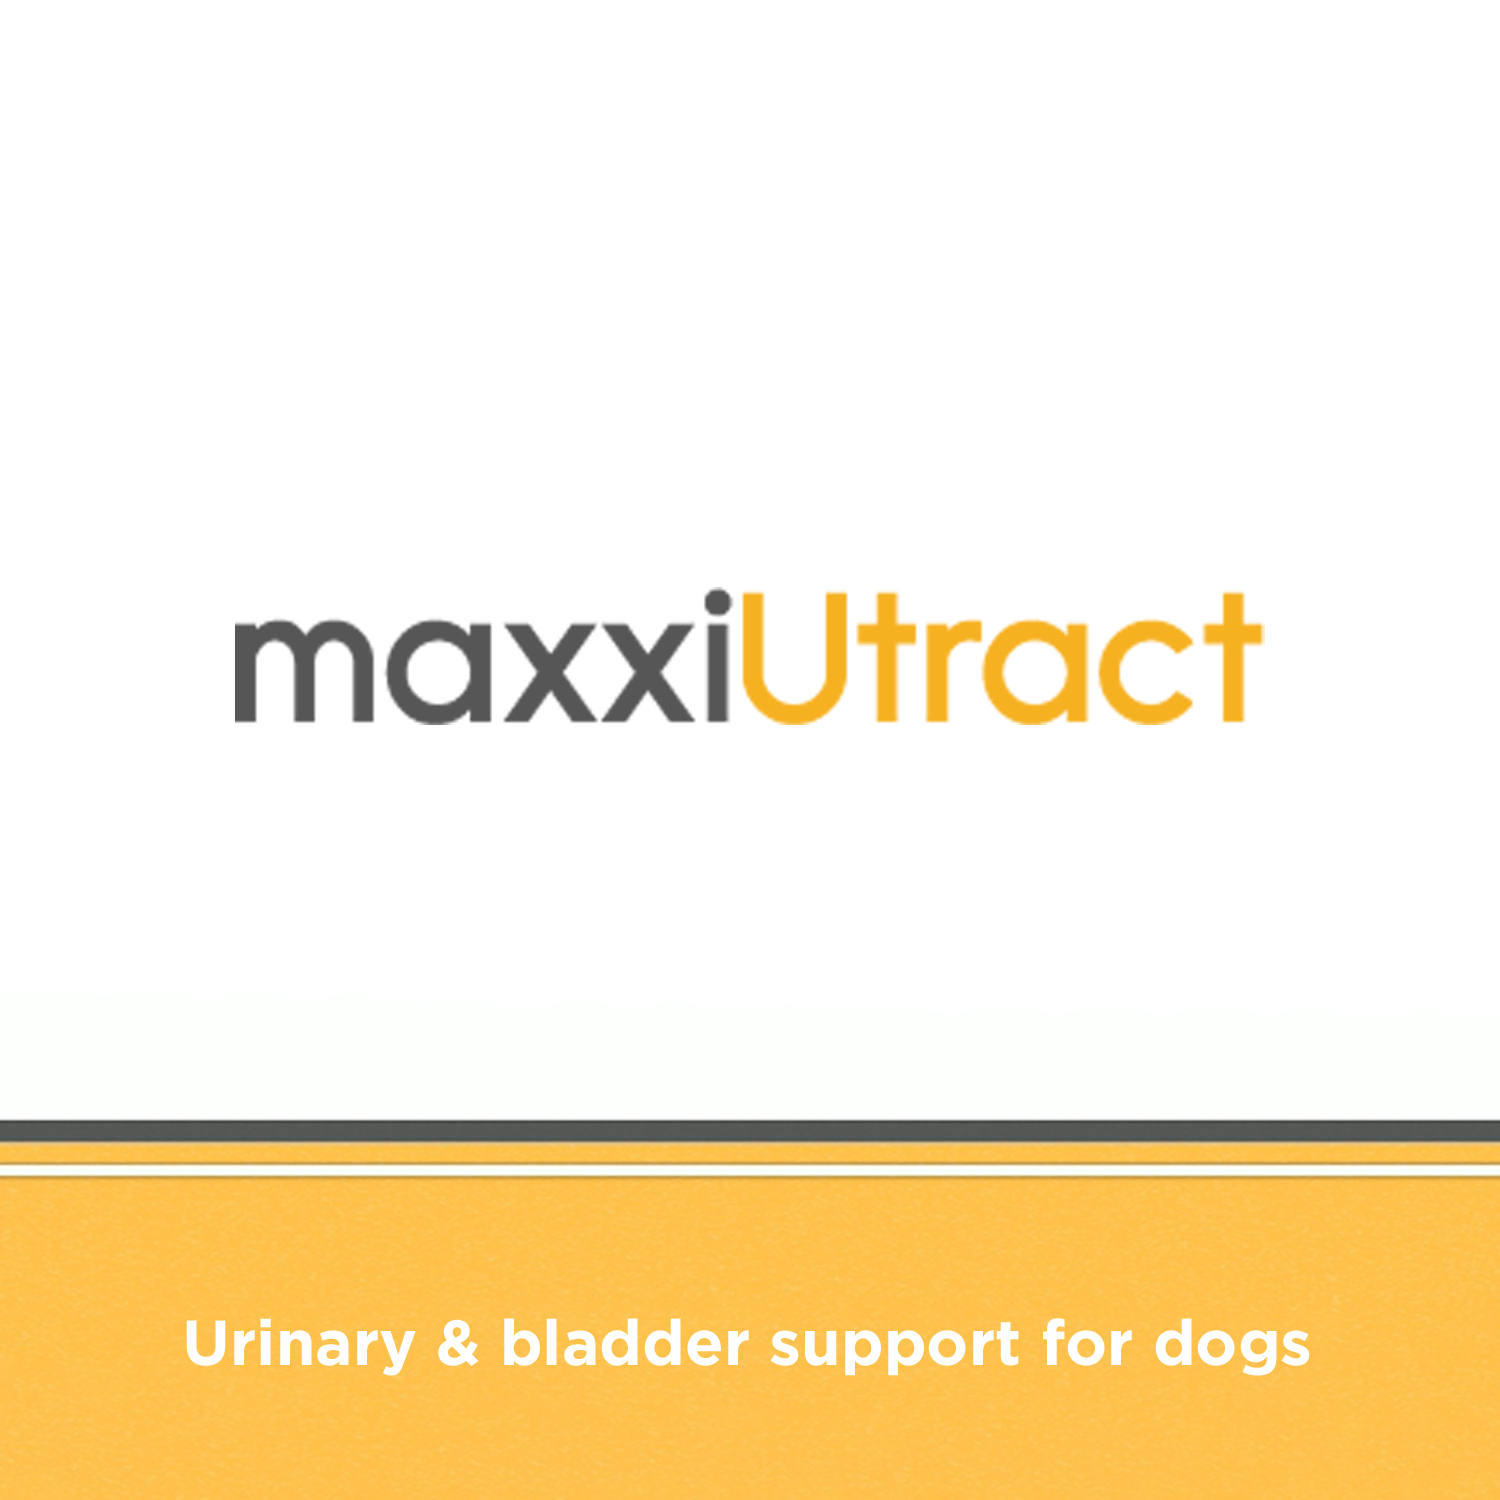 Supports the whole canine urinary system